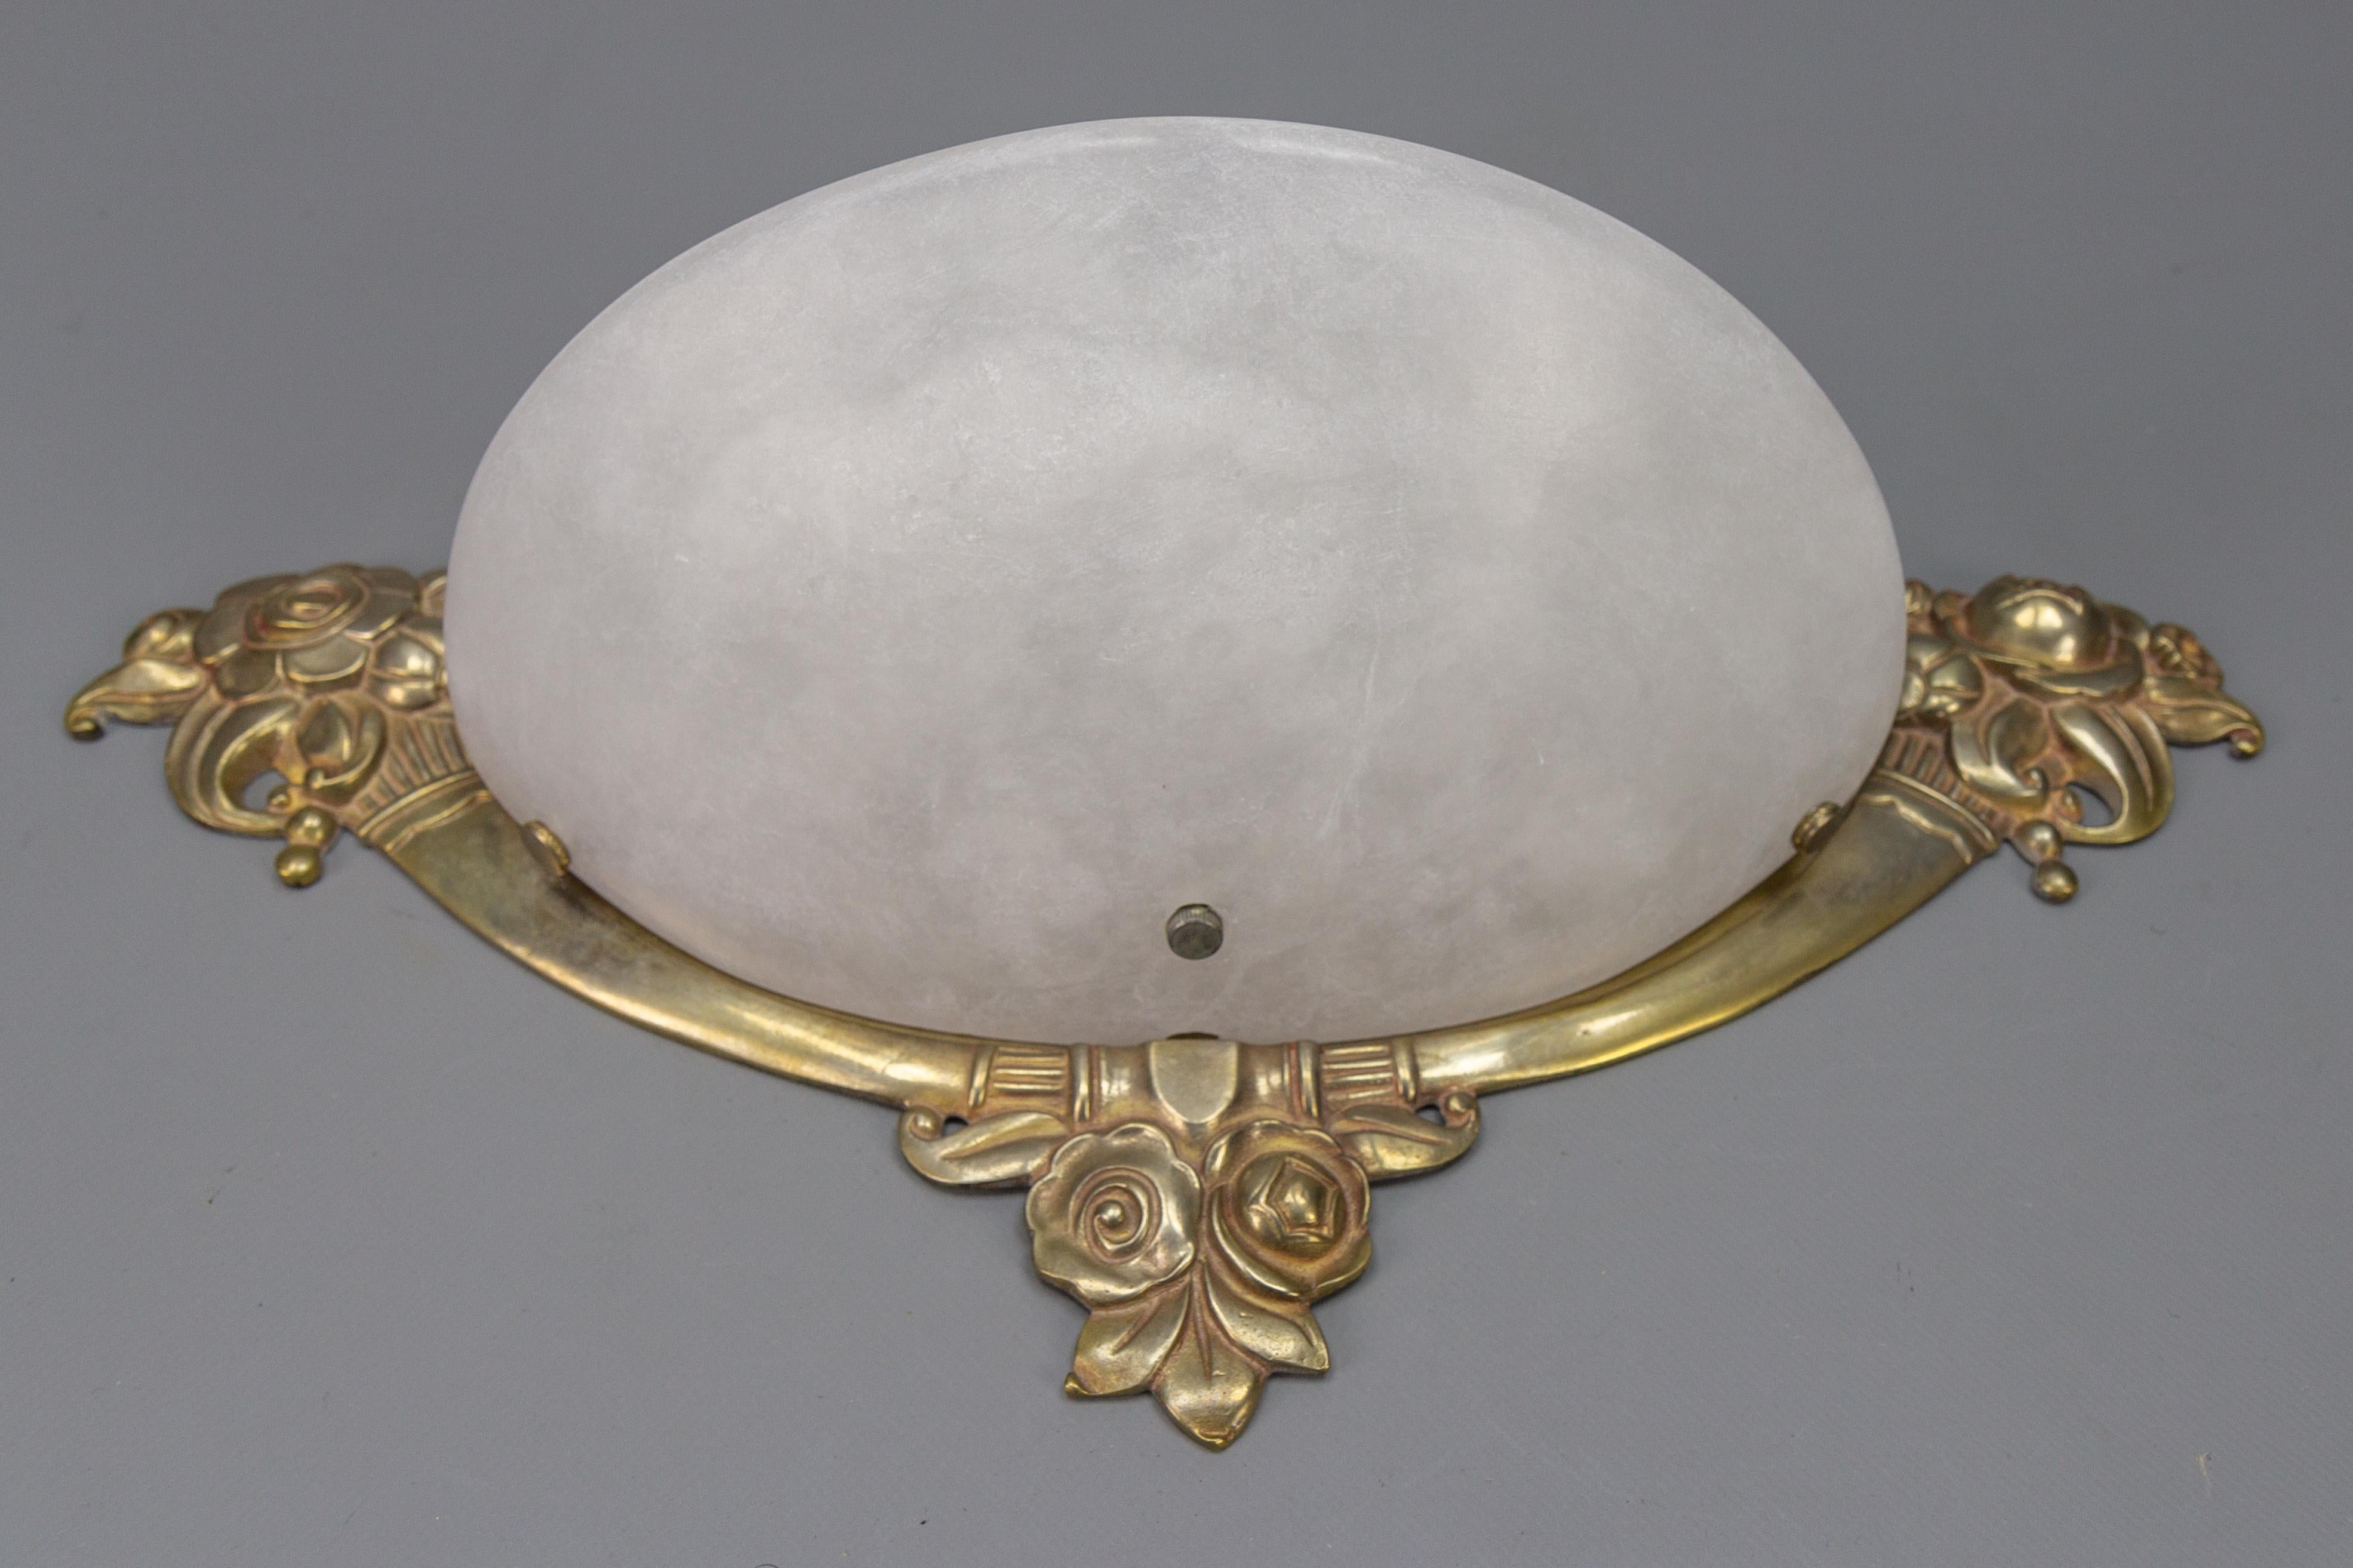 French Art Deco style alabaster and bronze sconce from the 1970s.
This absolutely adorable and ornate sconce features a bronze frame with stylized Art Deco floral motifs and a white alabaster lampshade.
Two new sockets for E14 size light